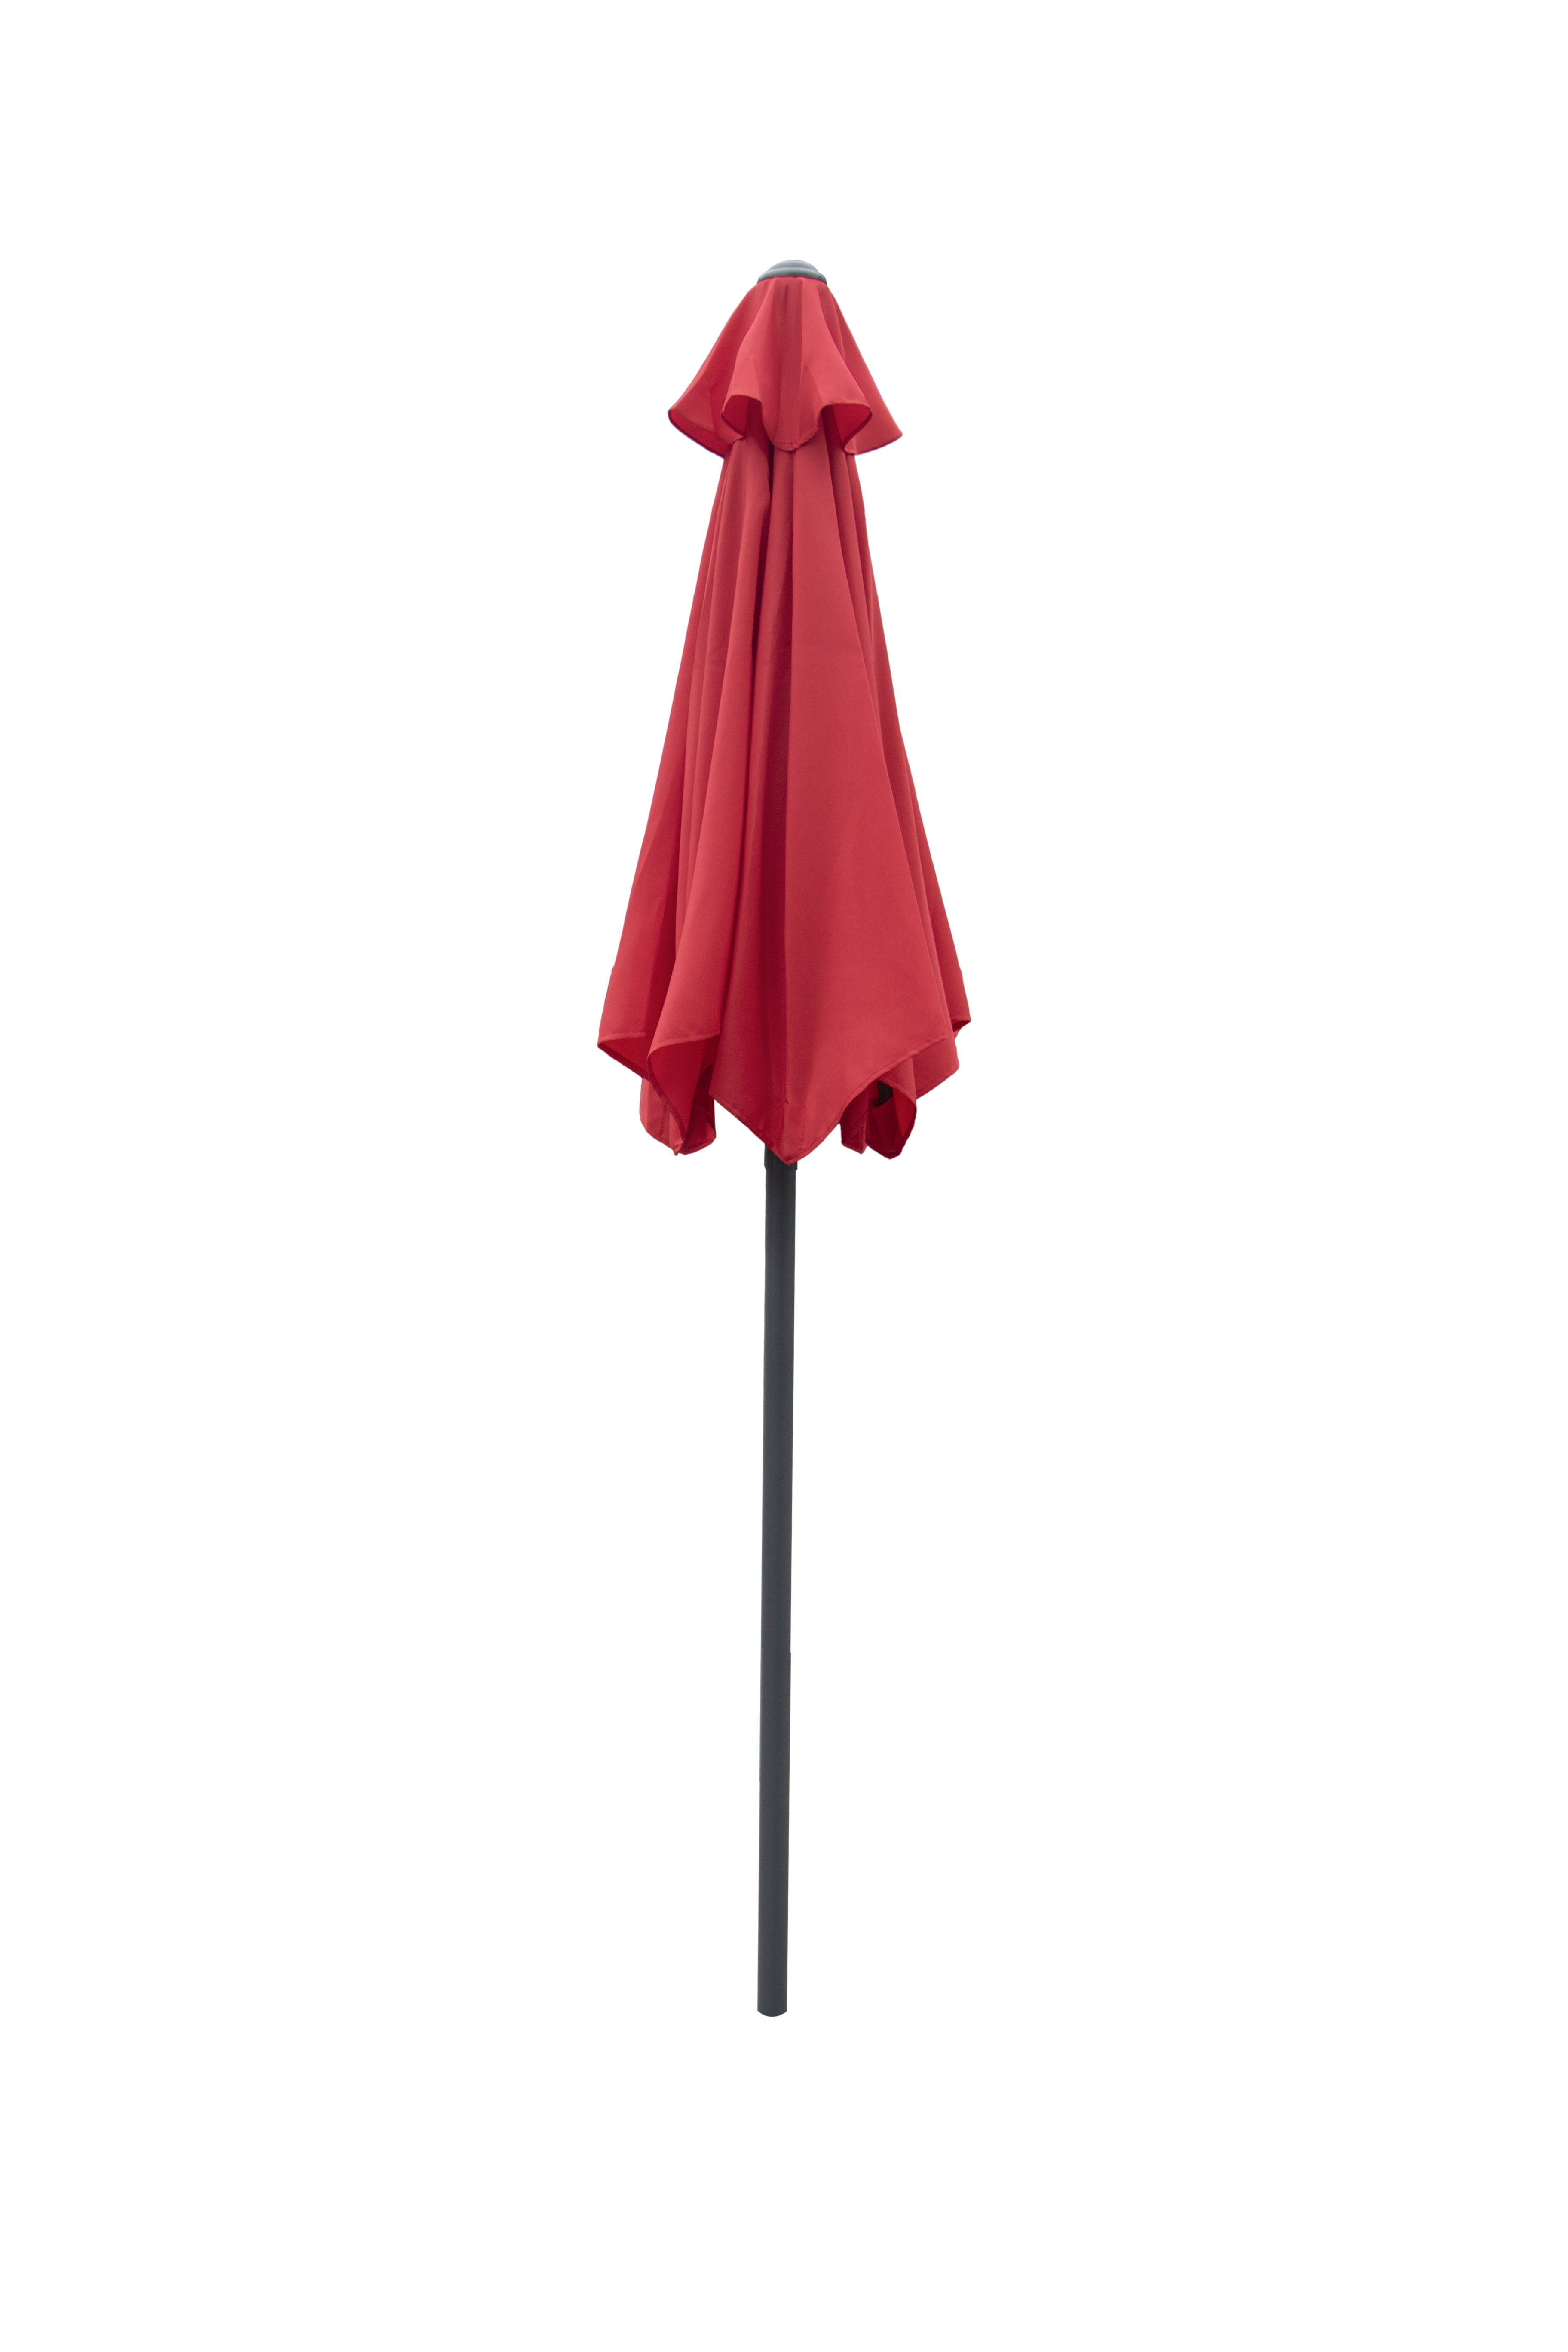 7' Tilting market umbrella, w/out base, cover included RED